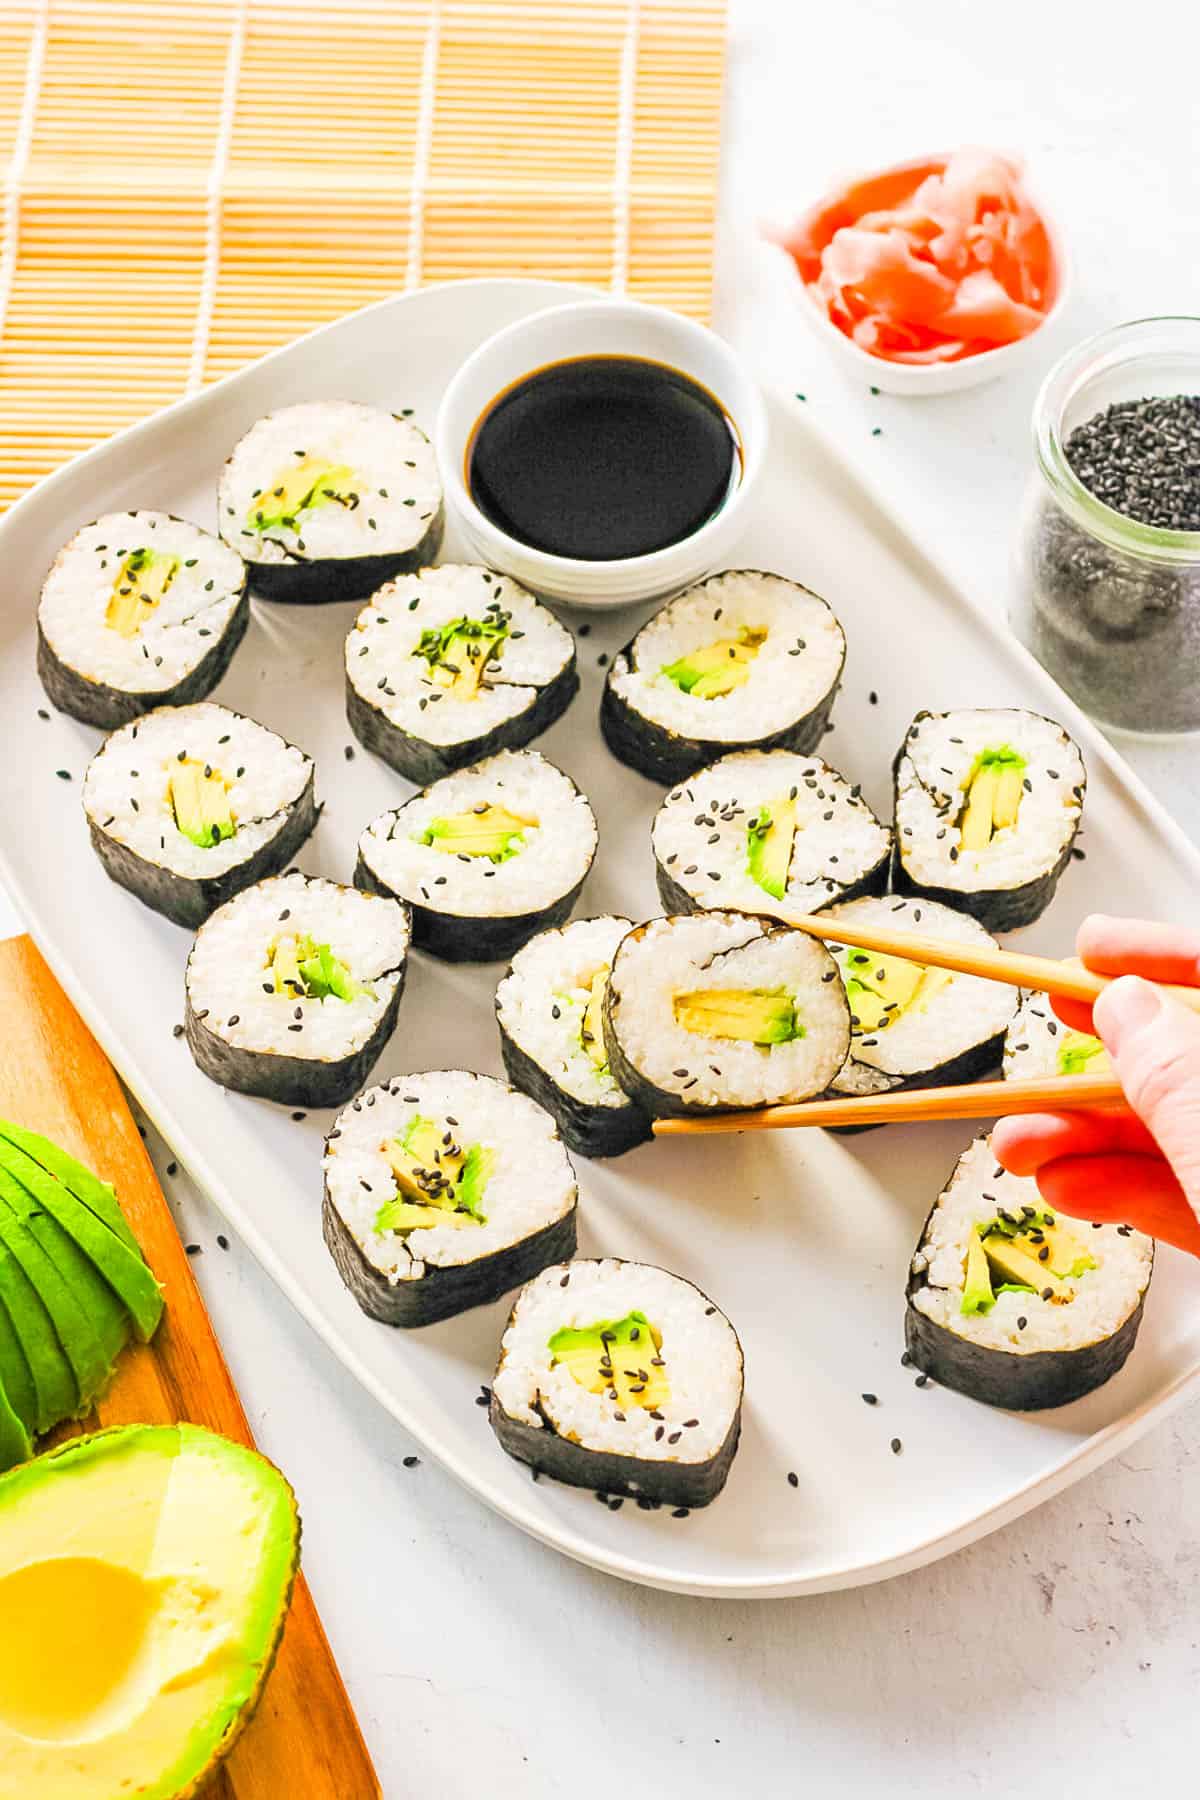 A hand using chopsticks to hold one of the avocado sushi pieces over a platter filled with sliced avocado sushi.